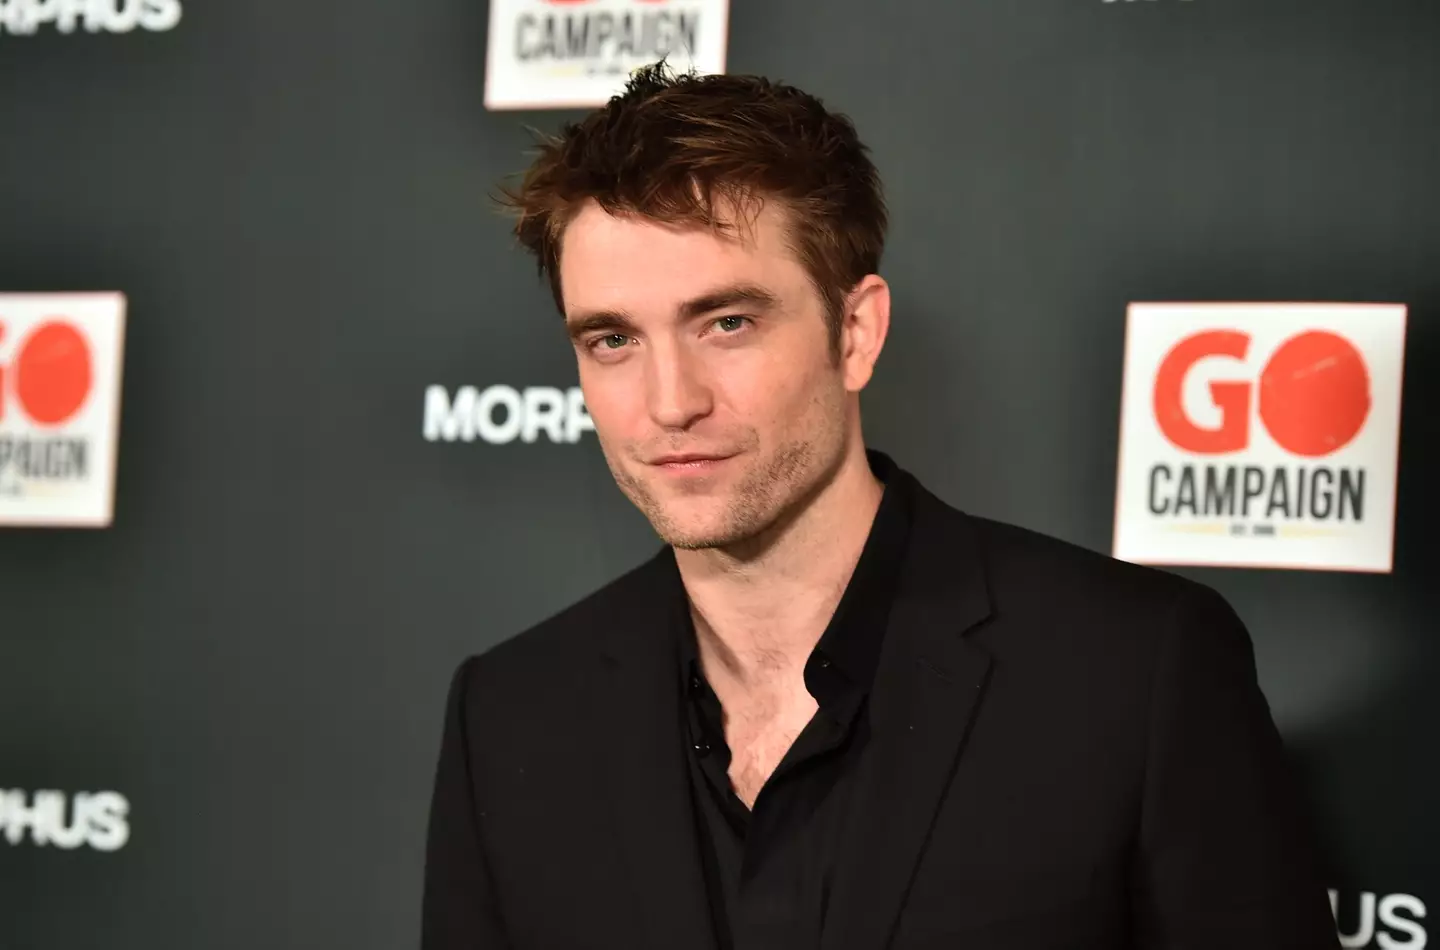 Robert Pattinson would play a serial killer who becomes a politician to relax the law on murder.